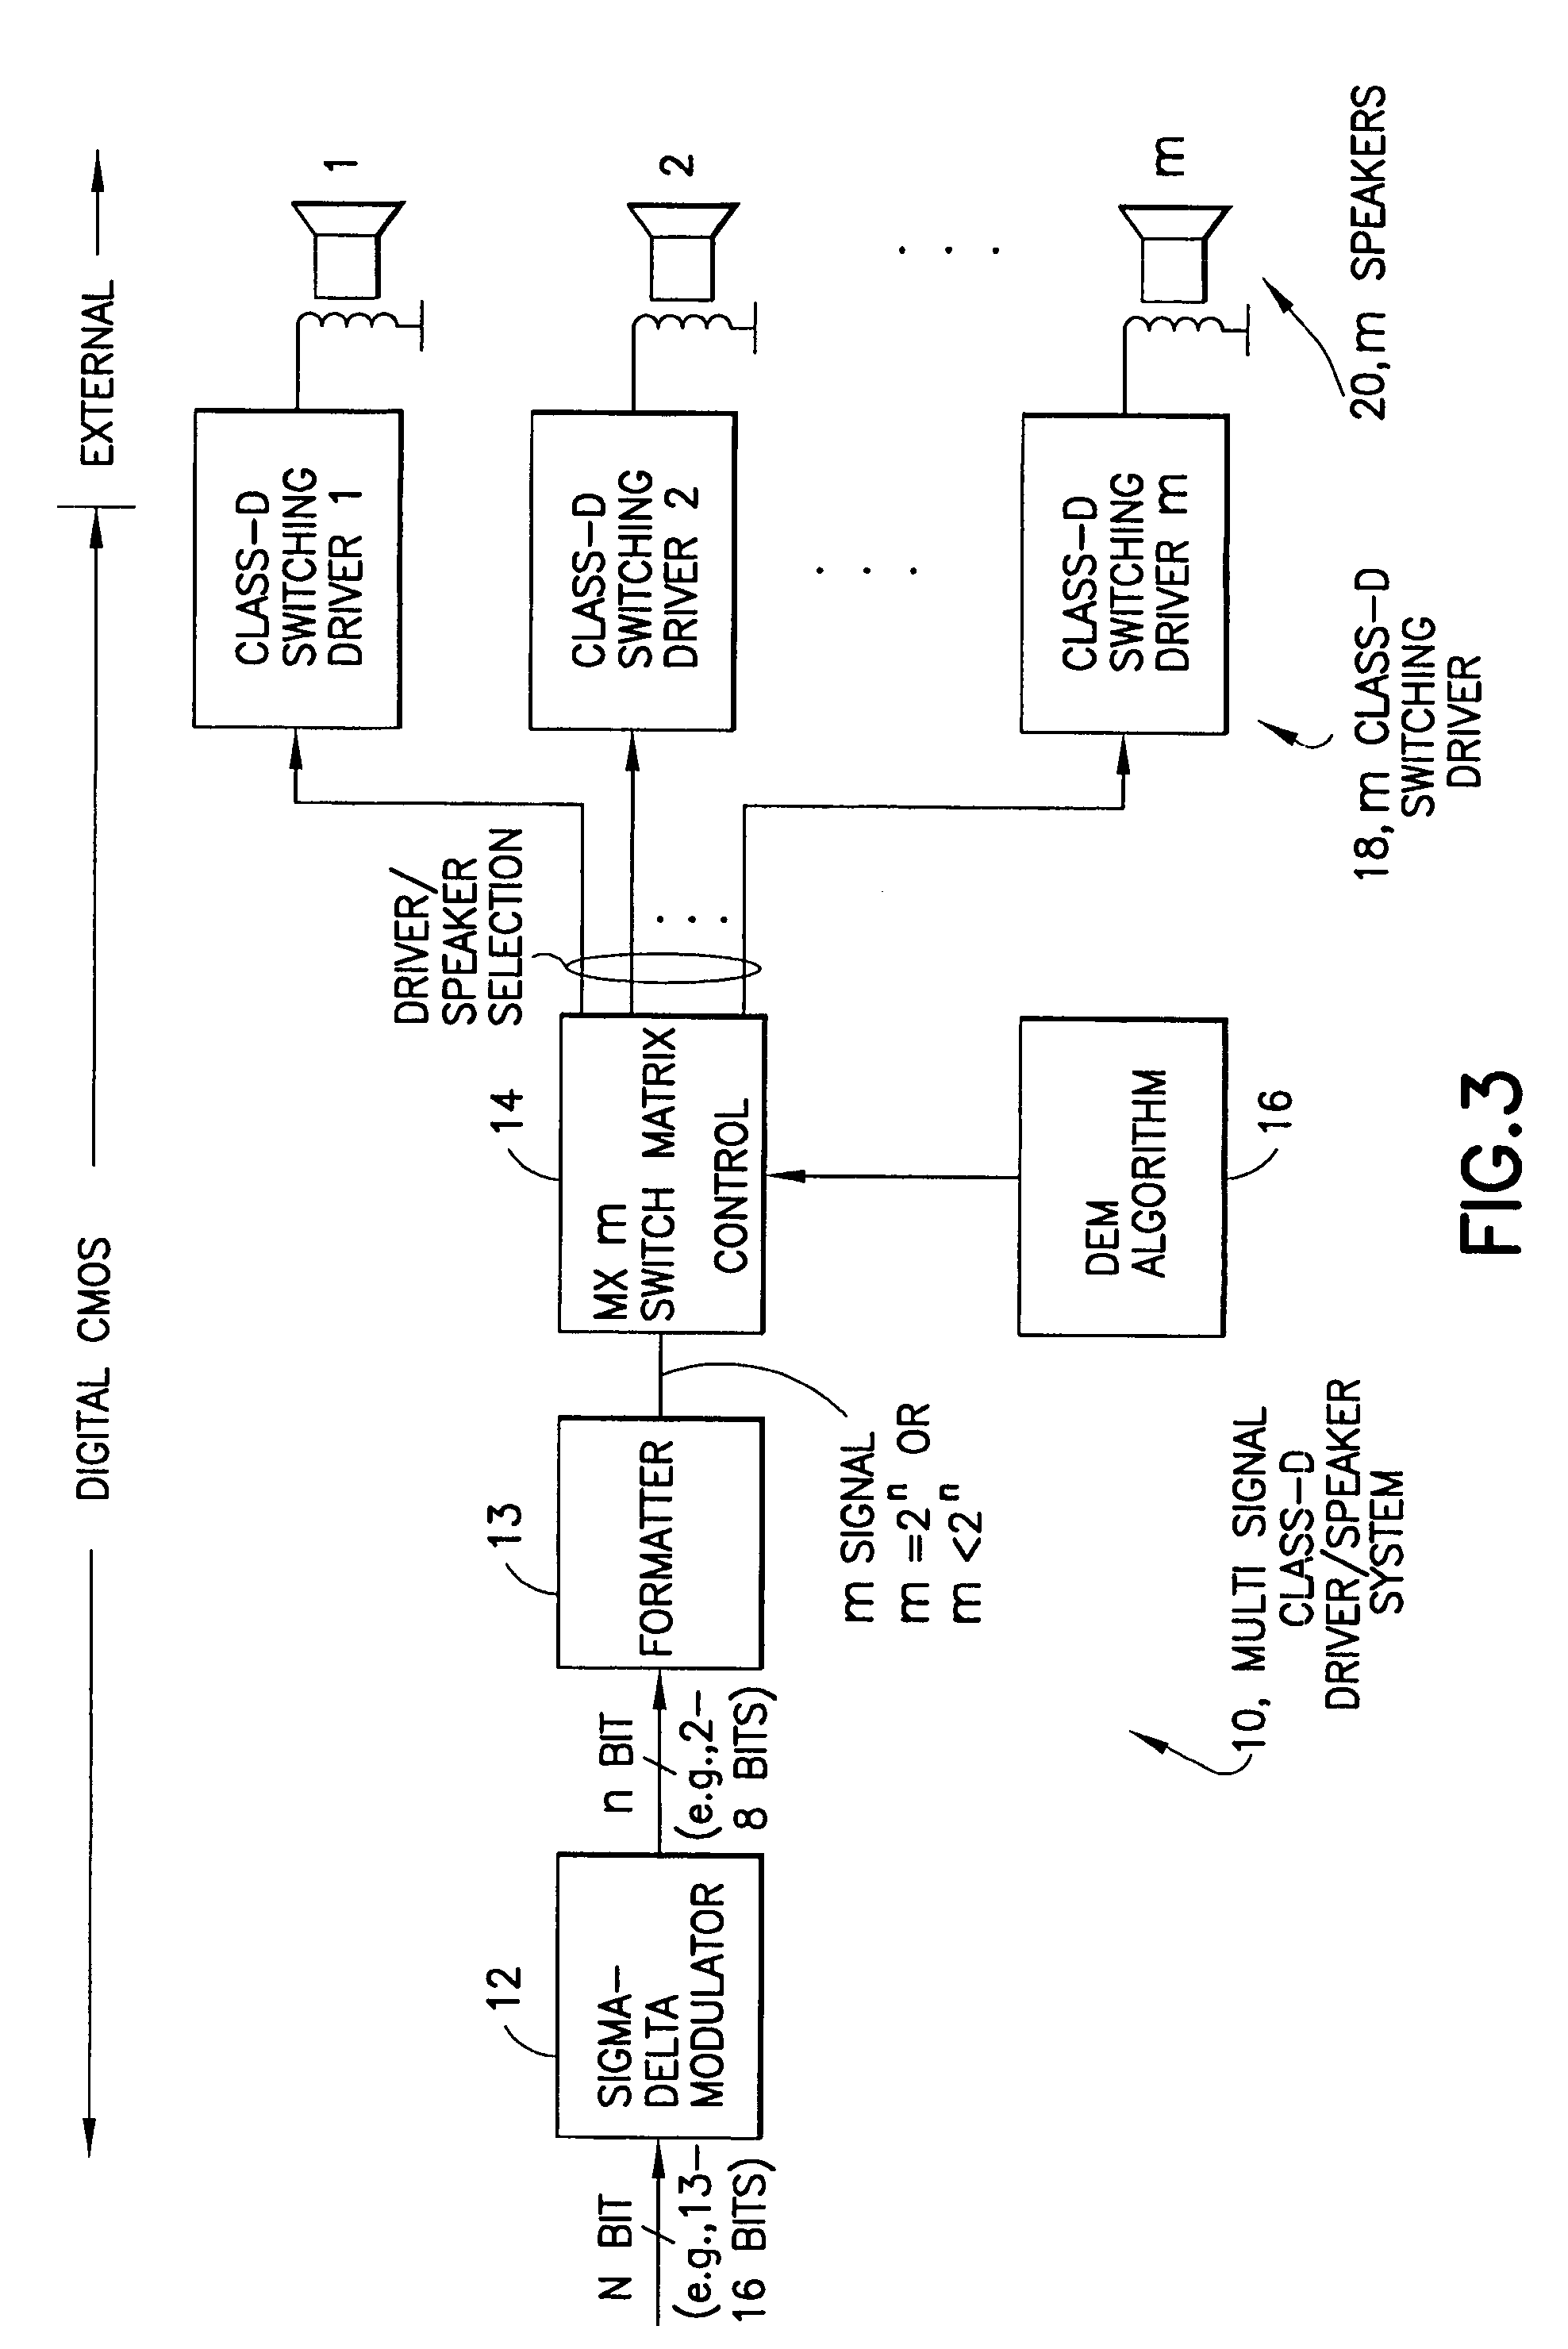 Method and apparatus for implementing a class D driver and speaker system